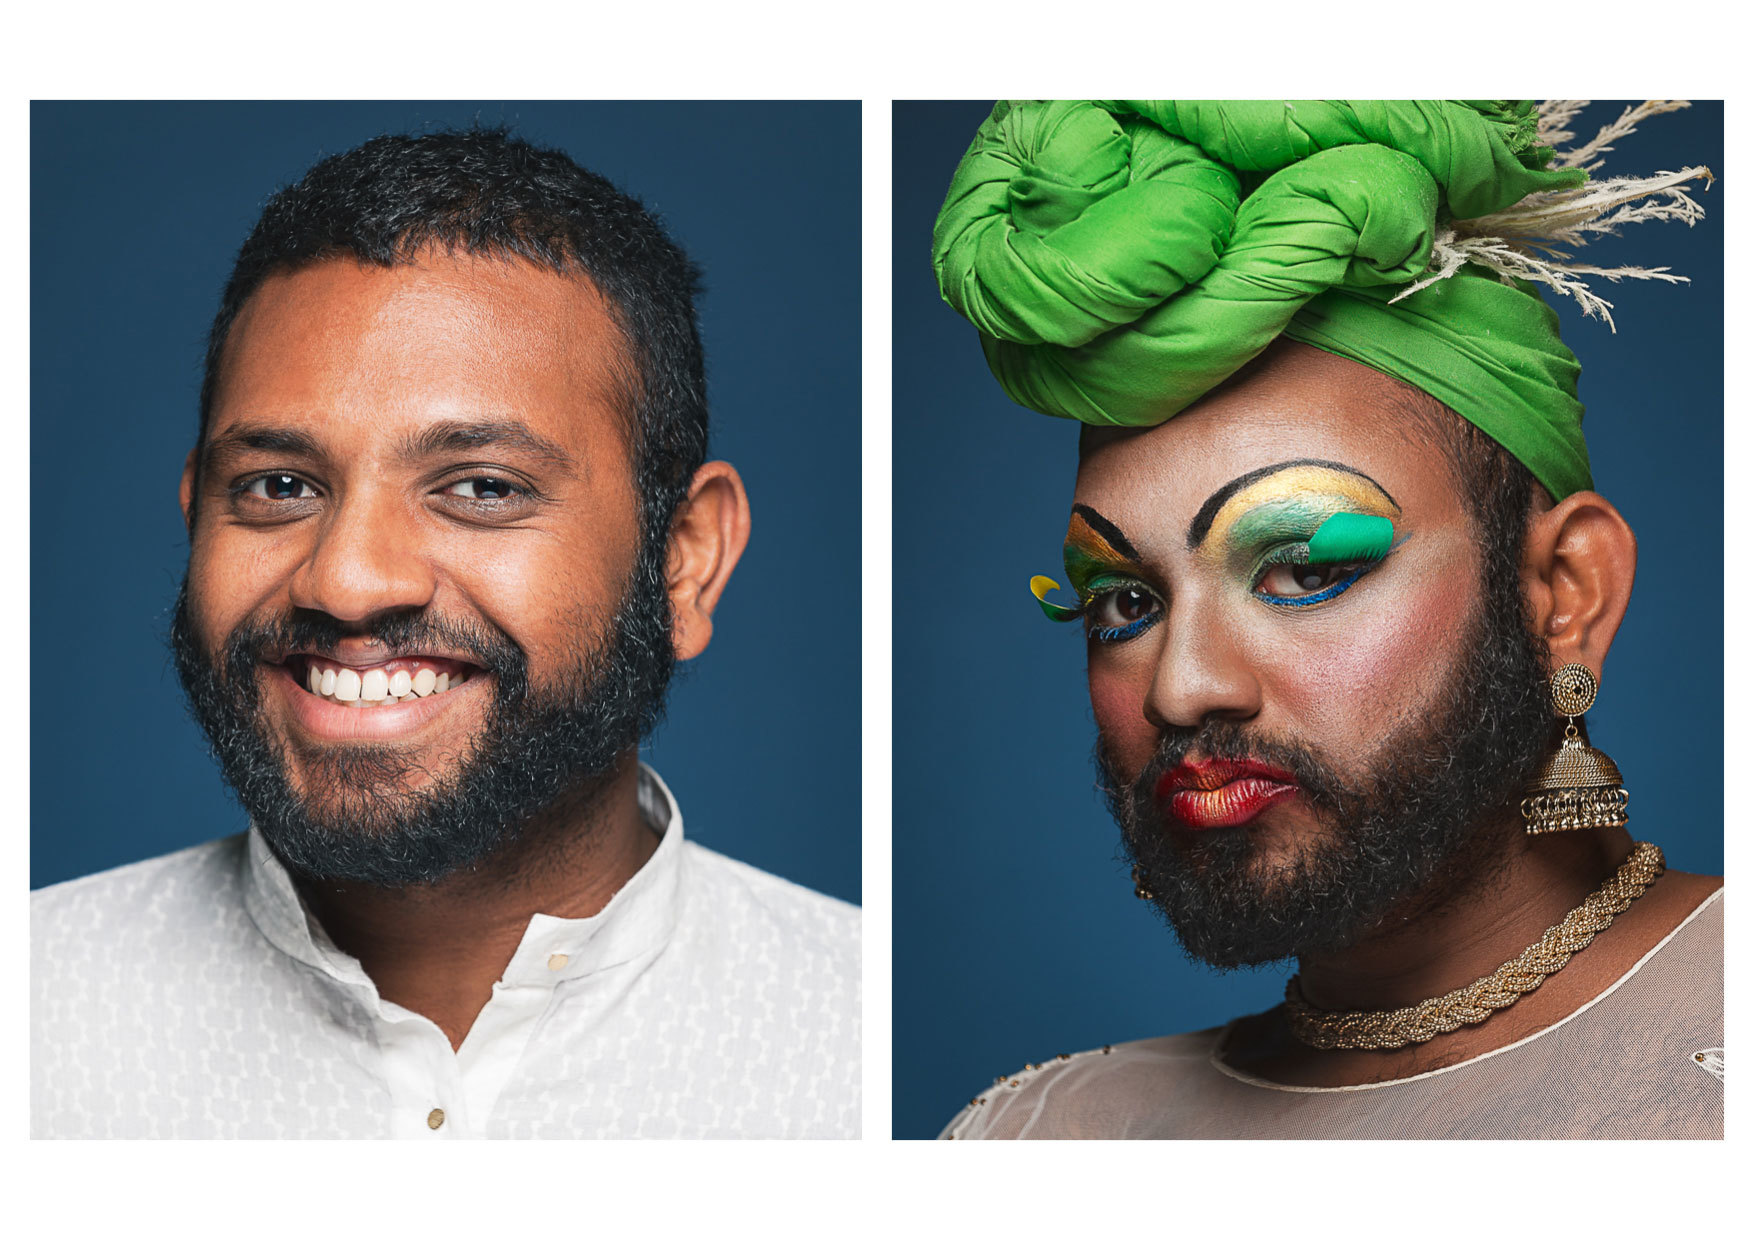 drag queen before and after